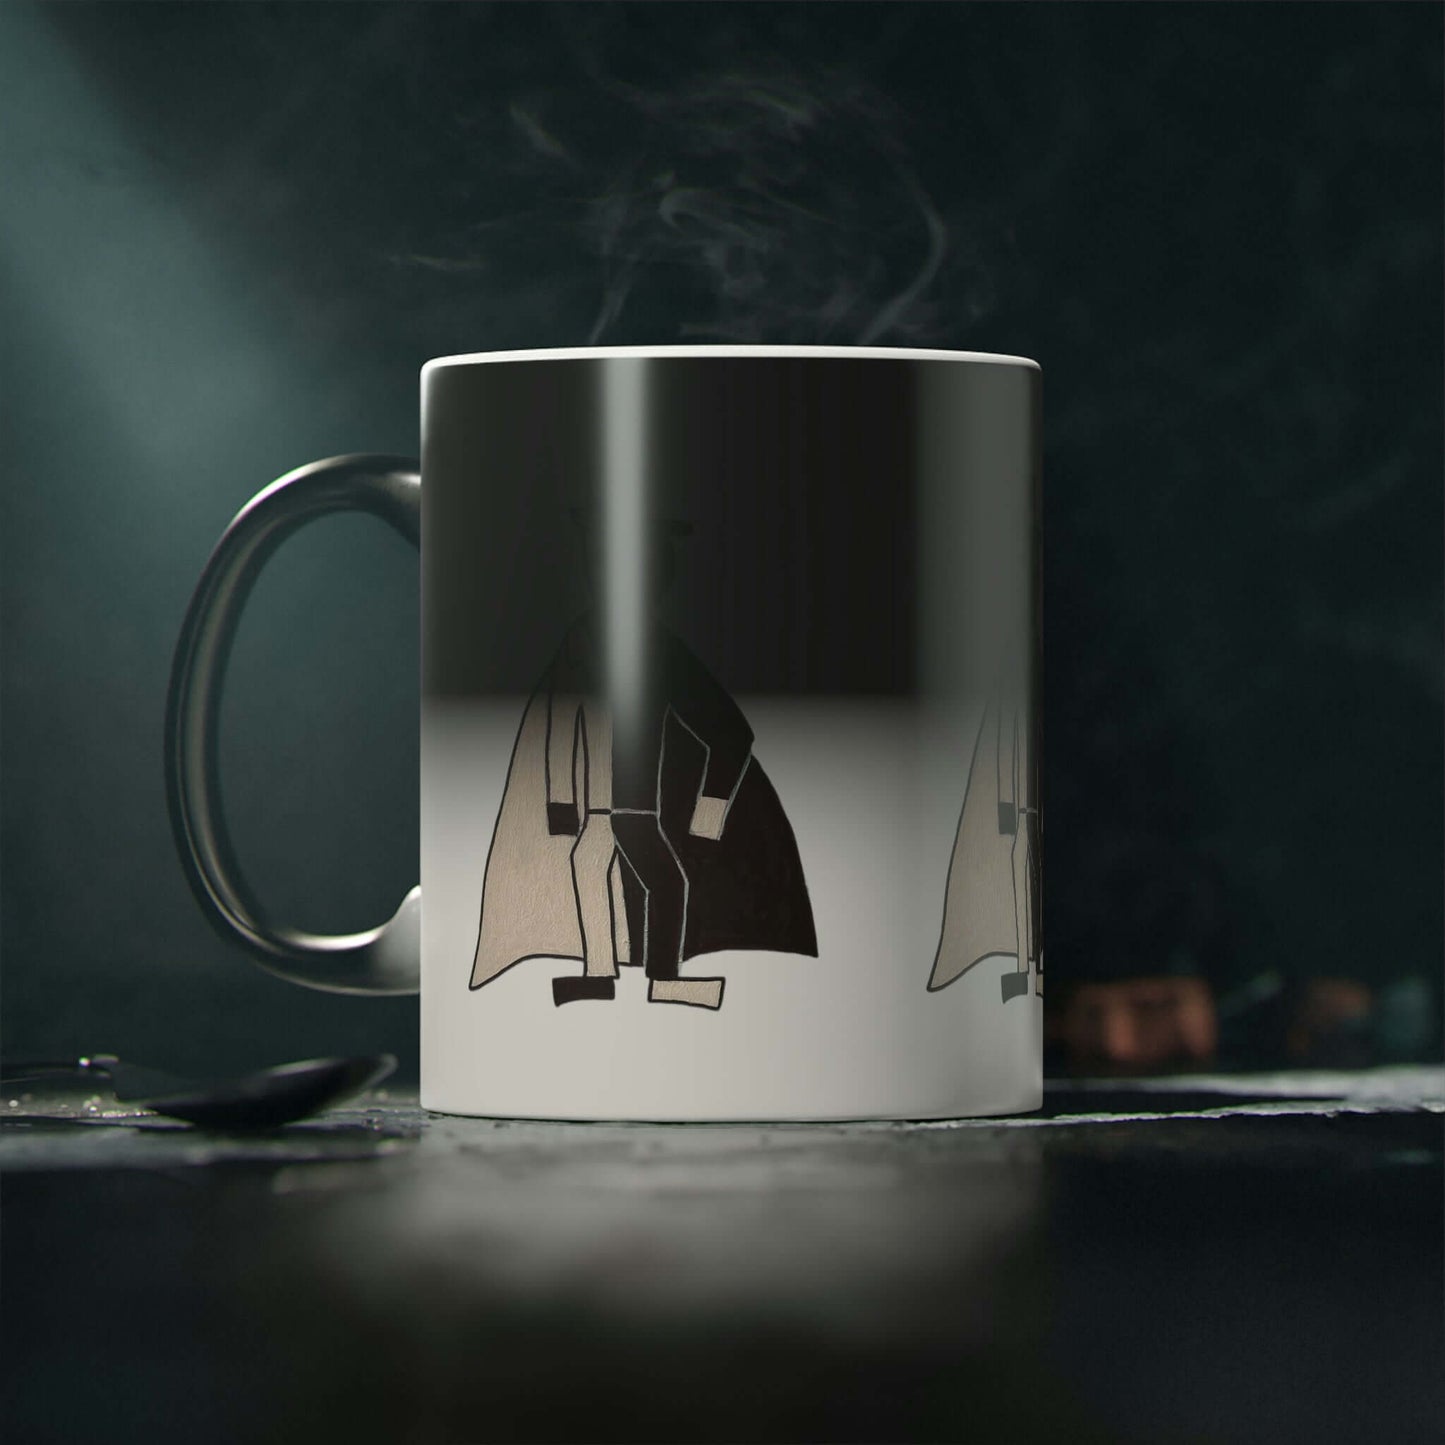 'Untitled' by D.B. 2022 on Magic Colour Changing Mug